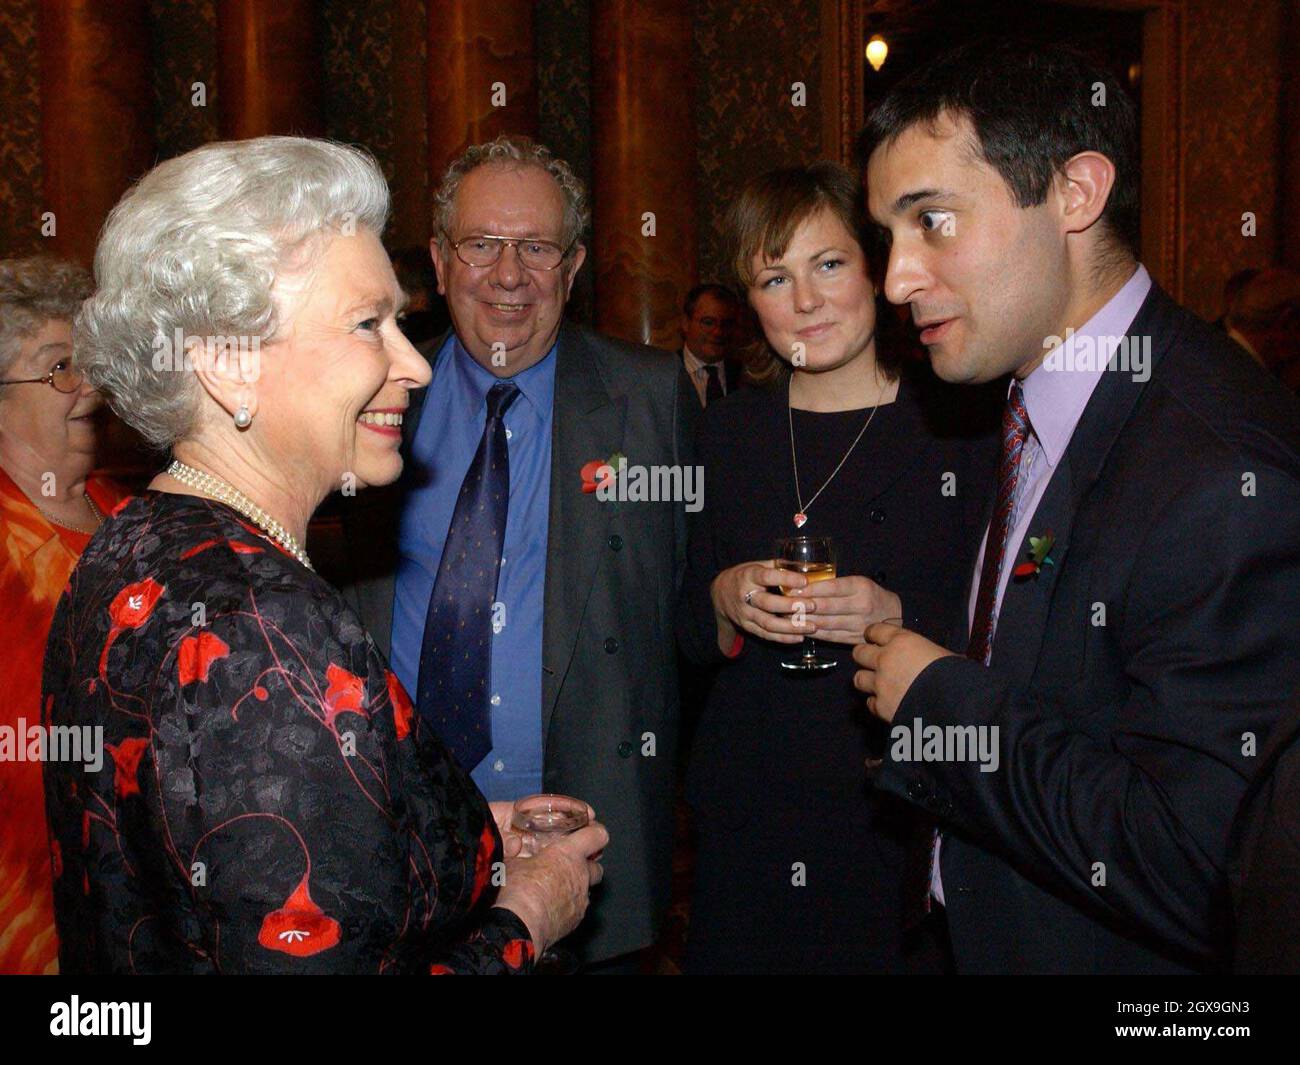 The Queen chats with Liberal Democrat MP for Oxford West and Abingdon, Dr  Evan Harris (right) and girlfriend Elizabeth O'Hara, at a reception at  Buckingham Palace, London, for Members of Parliament and